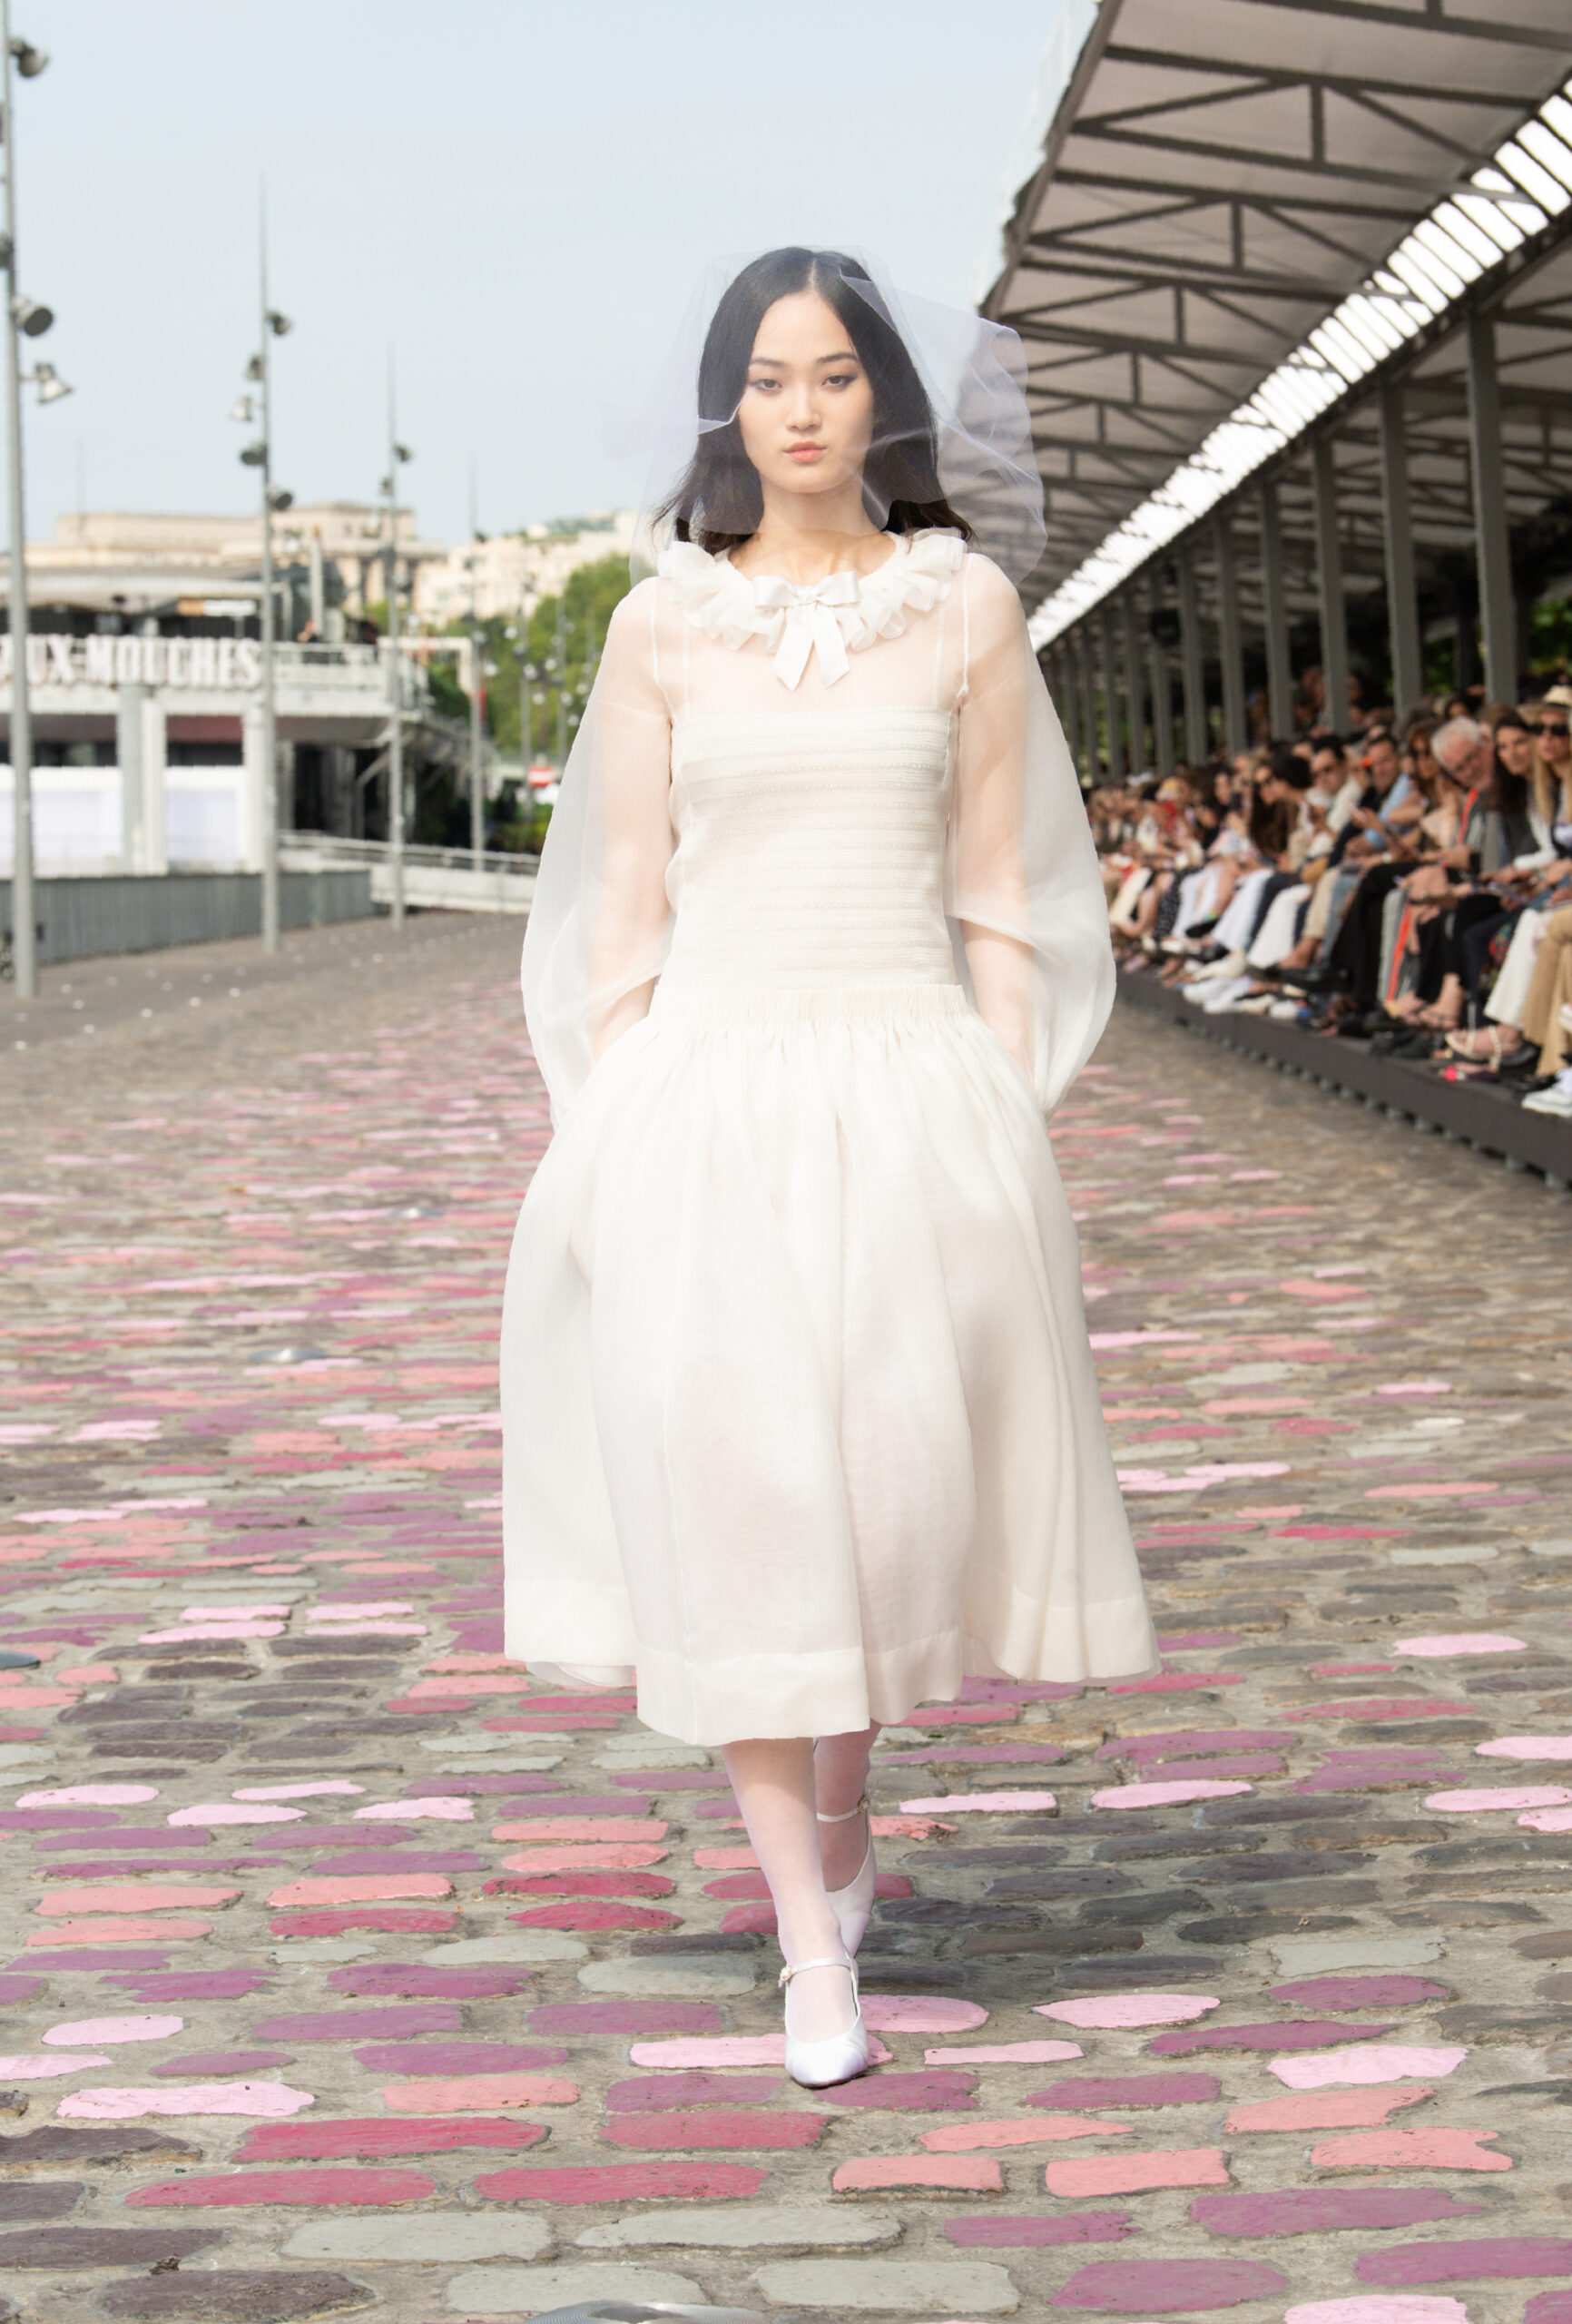 Chanel Haute Couture Collection.